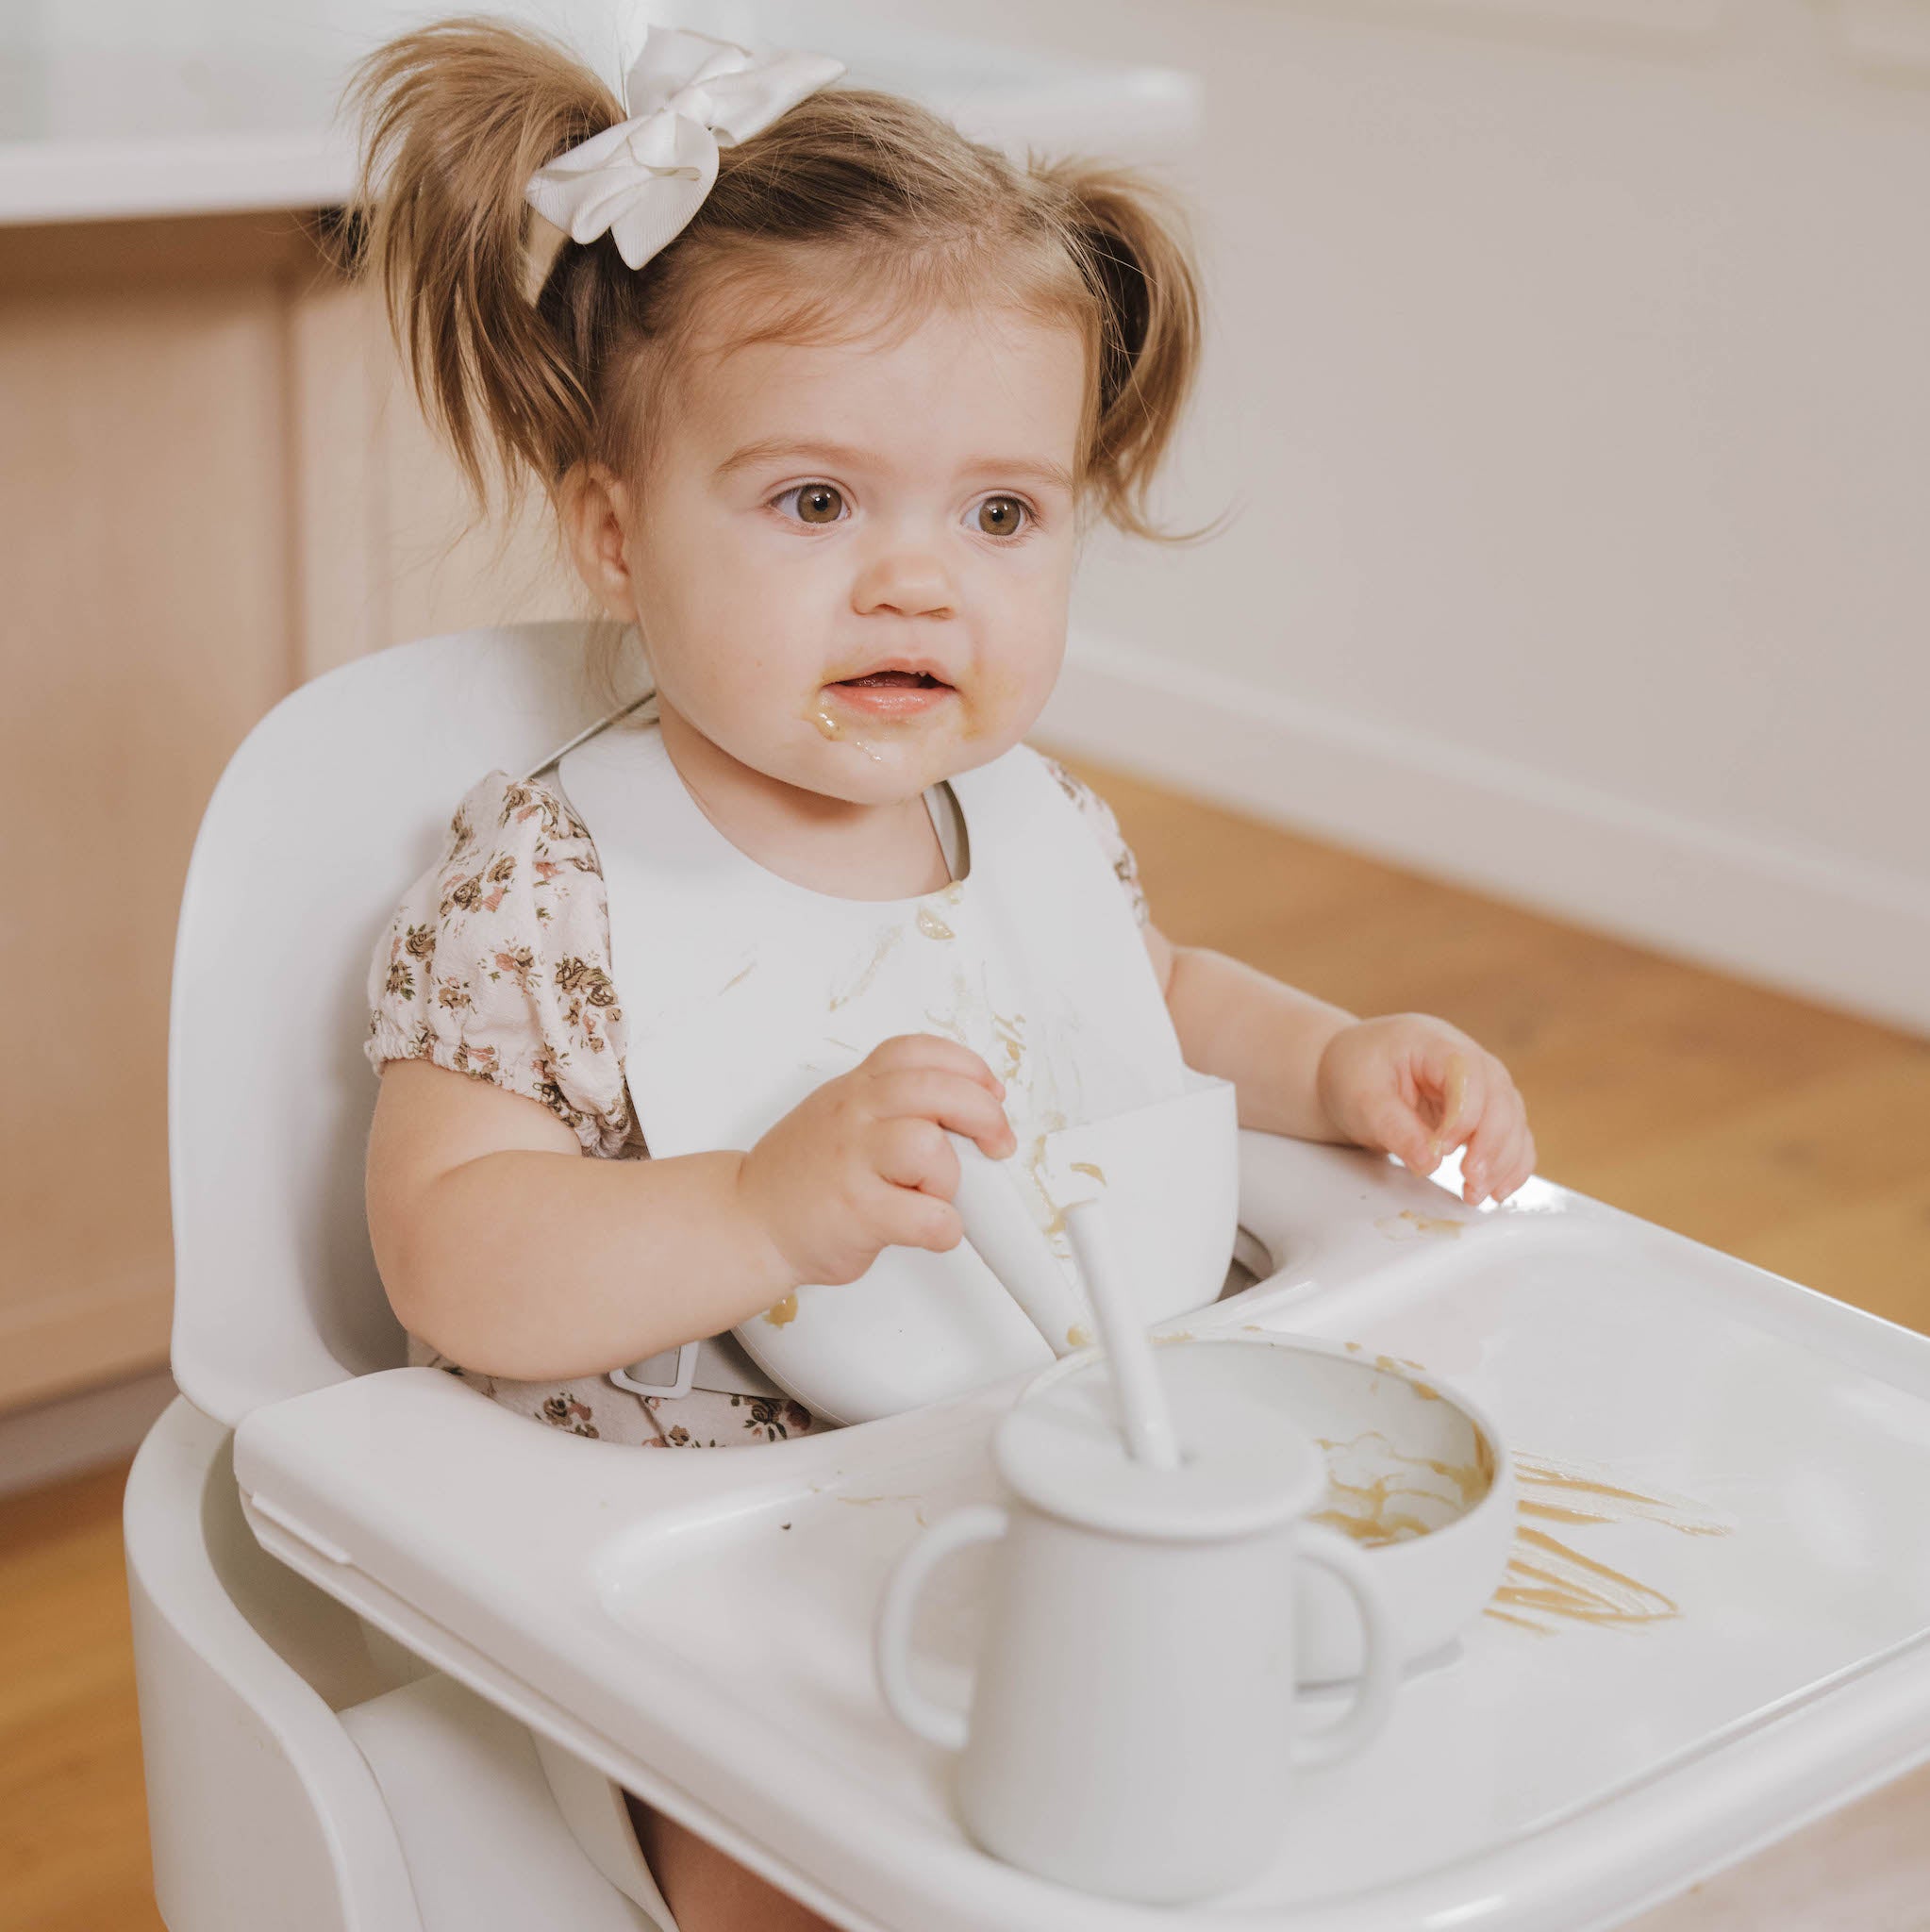 Toddler girl with pigtails eating messily in a high chair, holding a spoon with food on her face and bib.